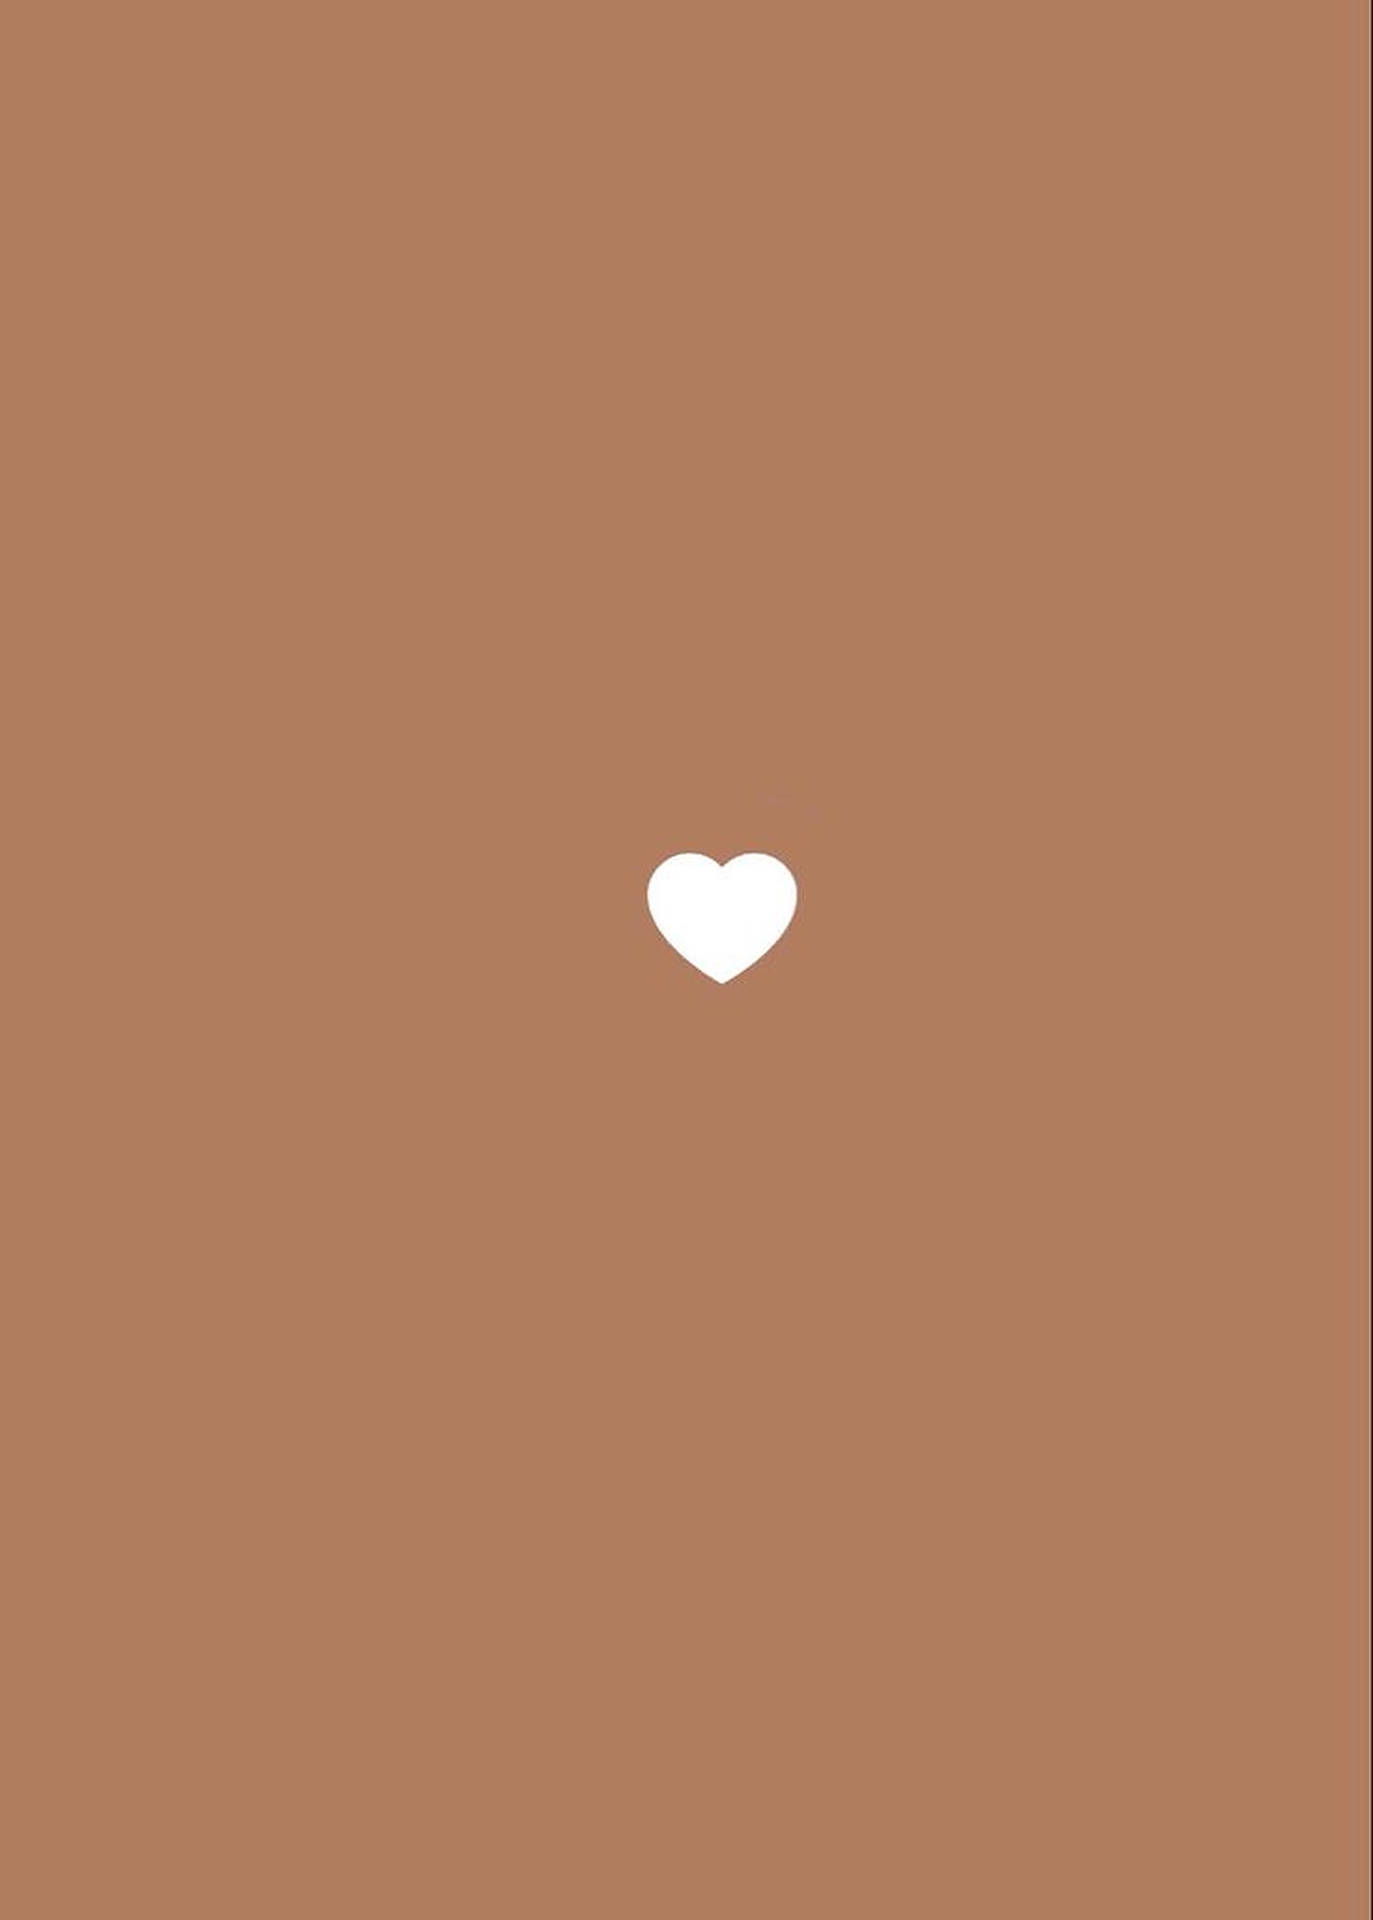 White Heart On Brown Background